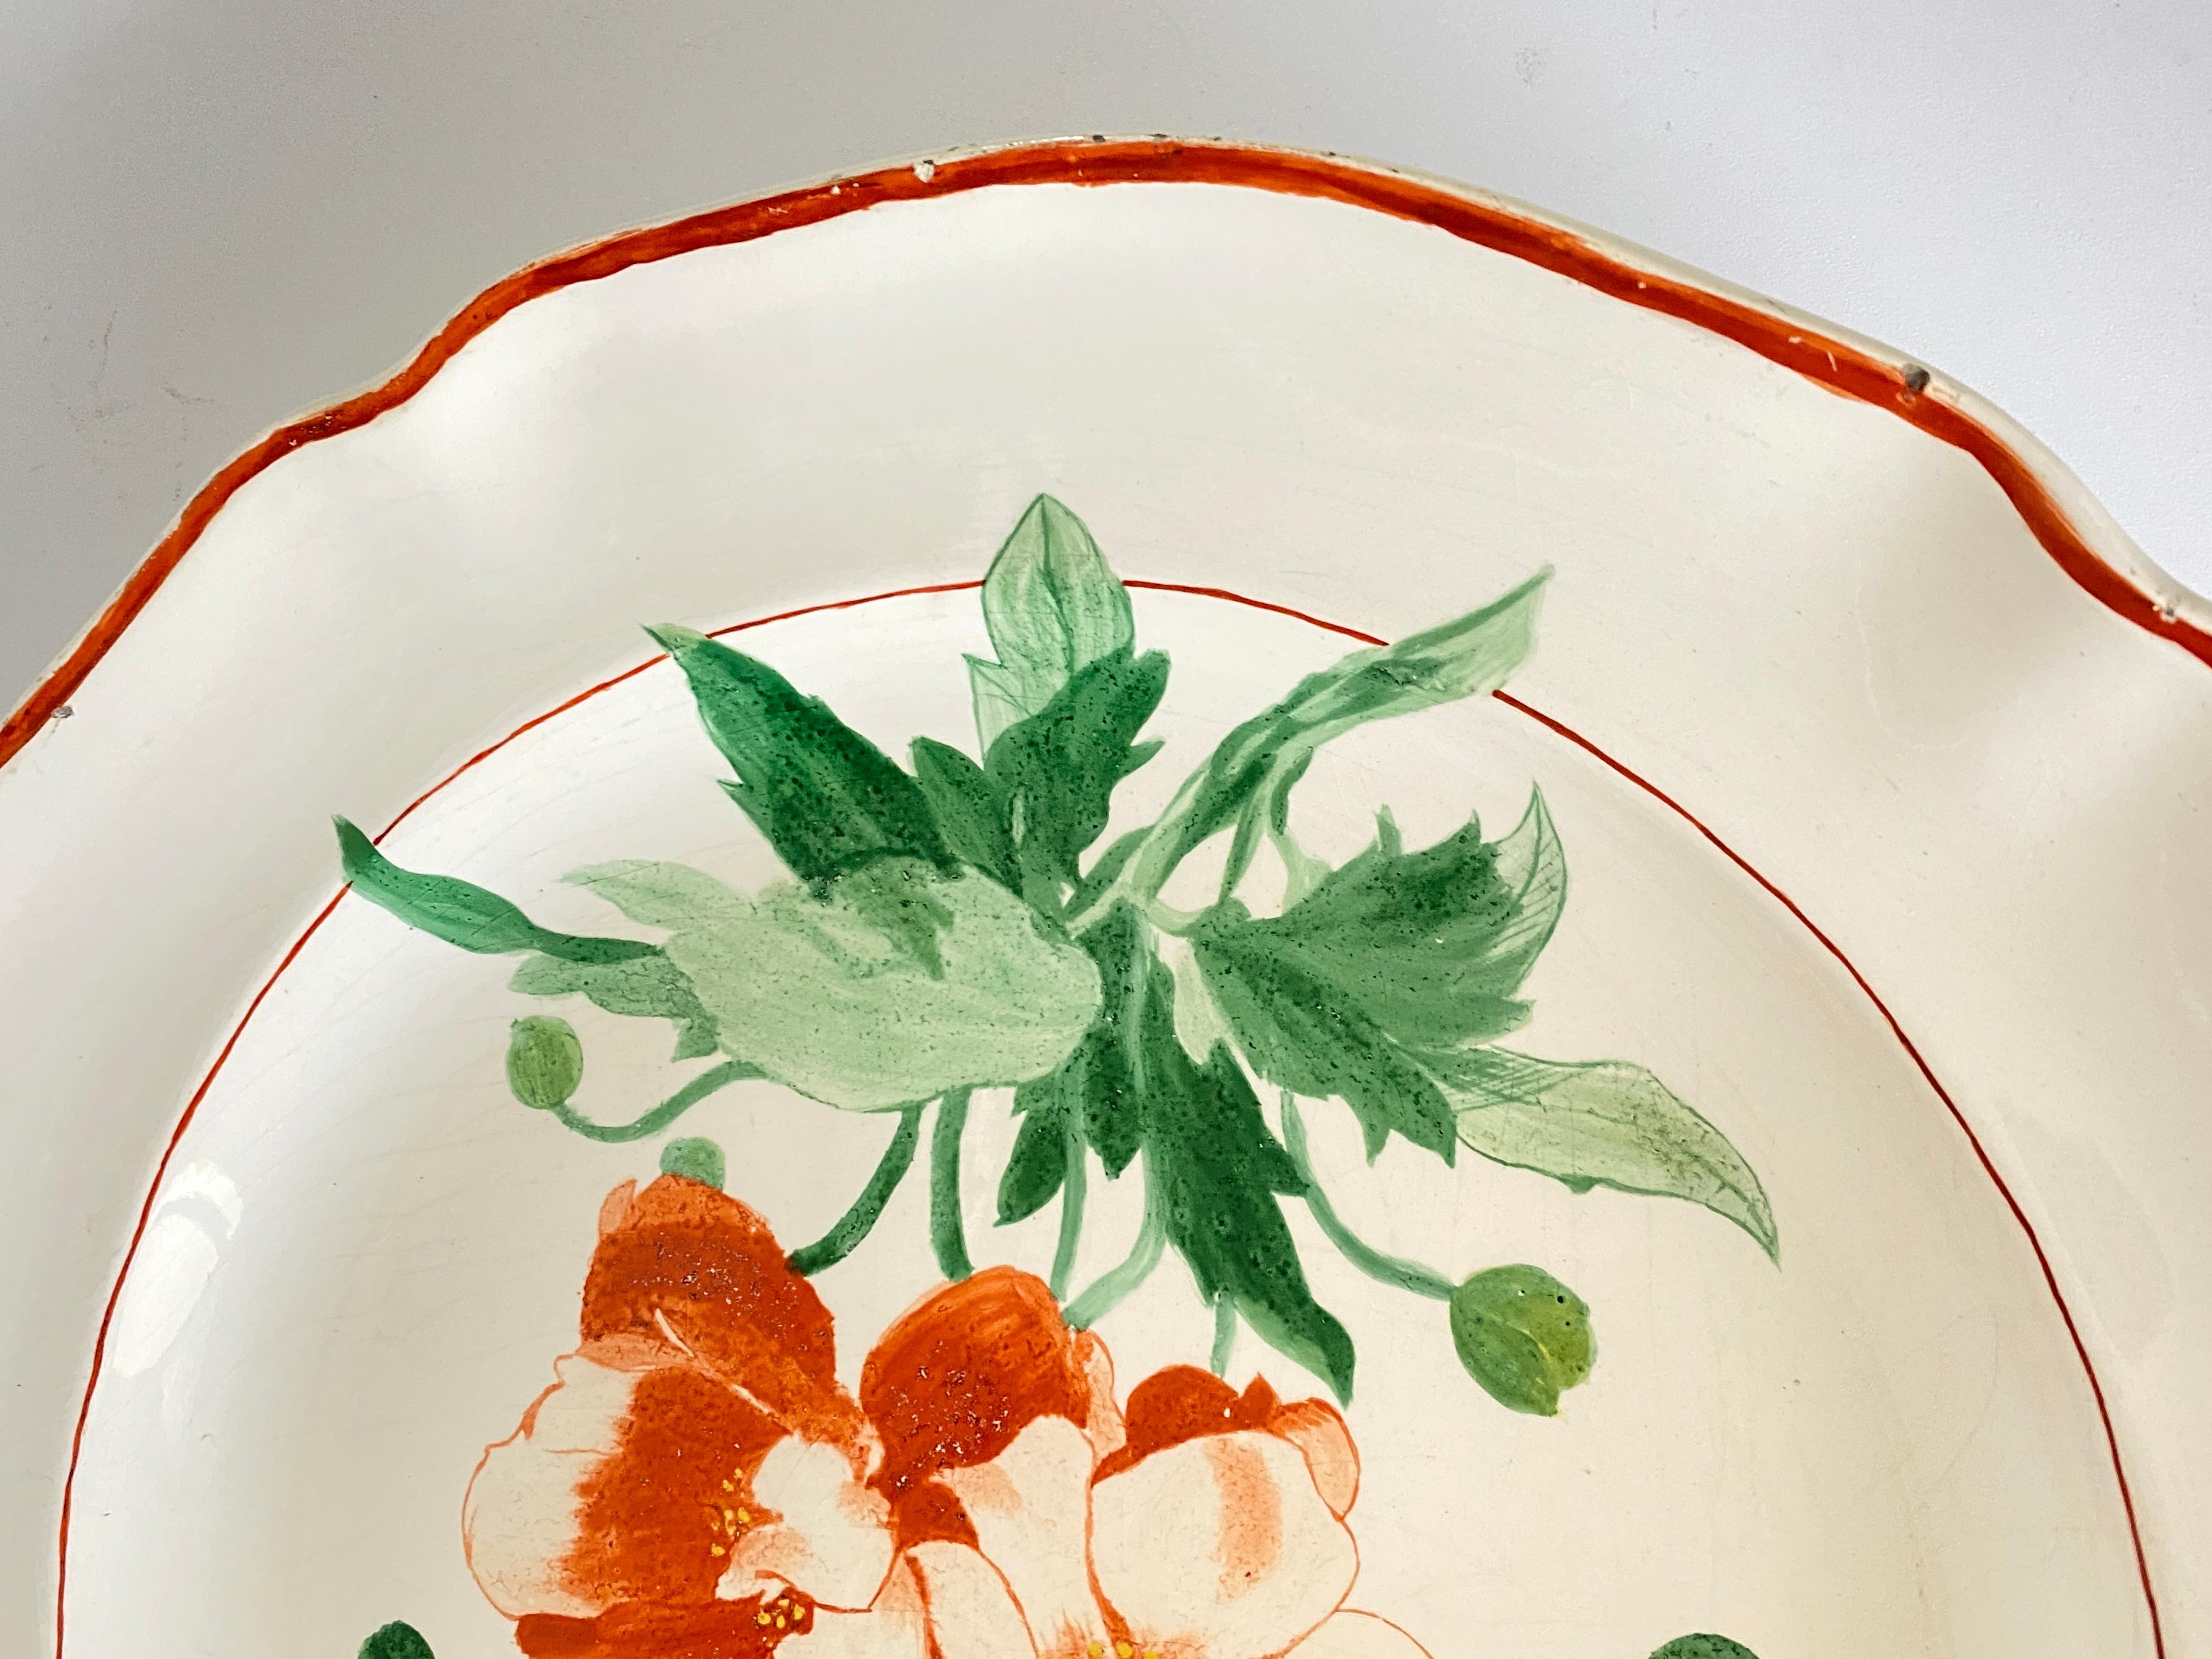 Old Dish by Luneville. This Dish is in Faience, and has been made in France,during the 19th.
The colors are Green and red, orange. It is signed.